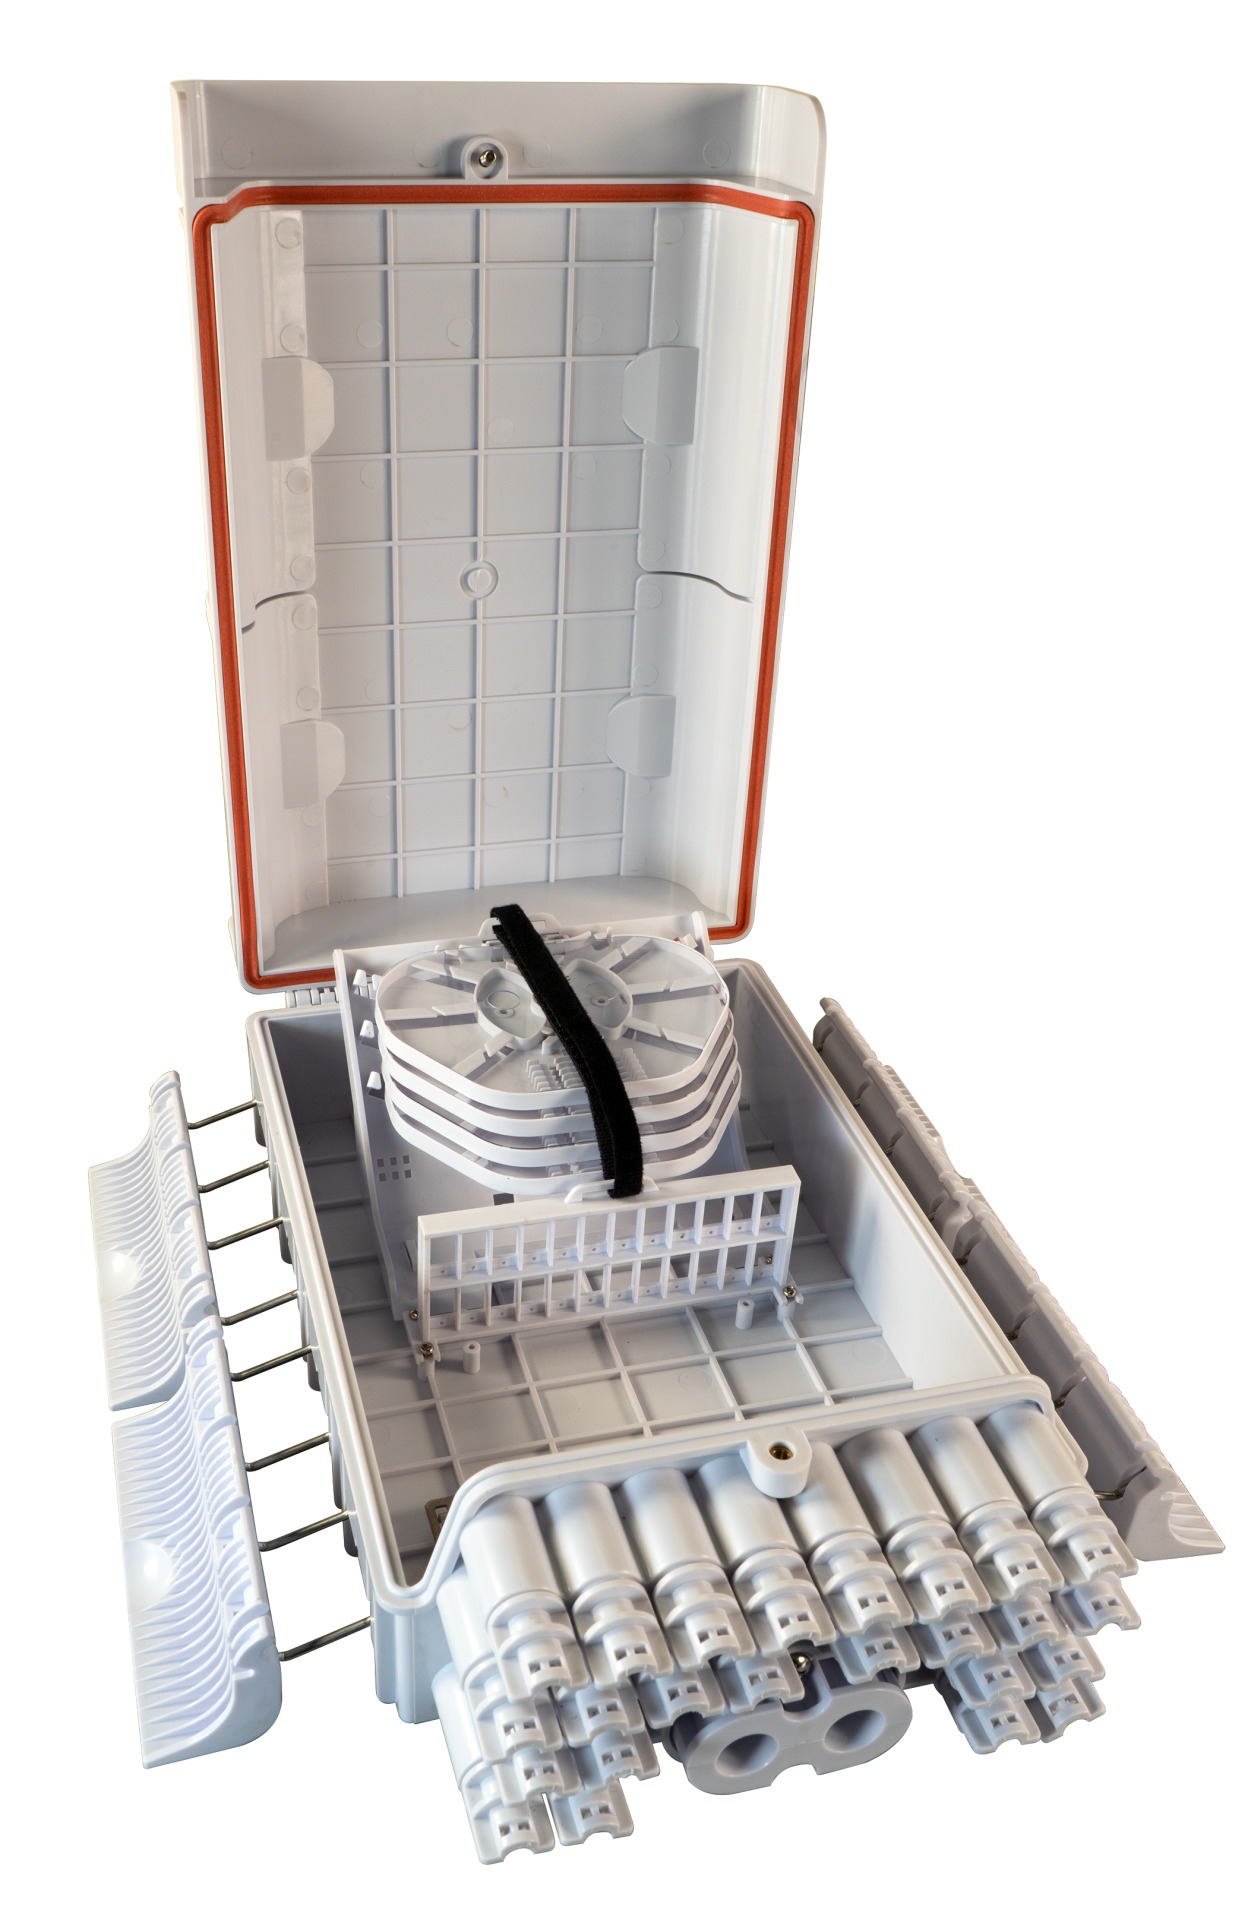 FTTH IP65 Connectionbox for 48 fiber, 24 adapter and Fiber overlength box